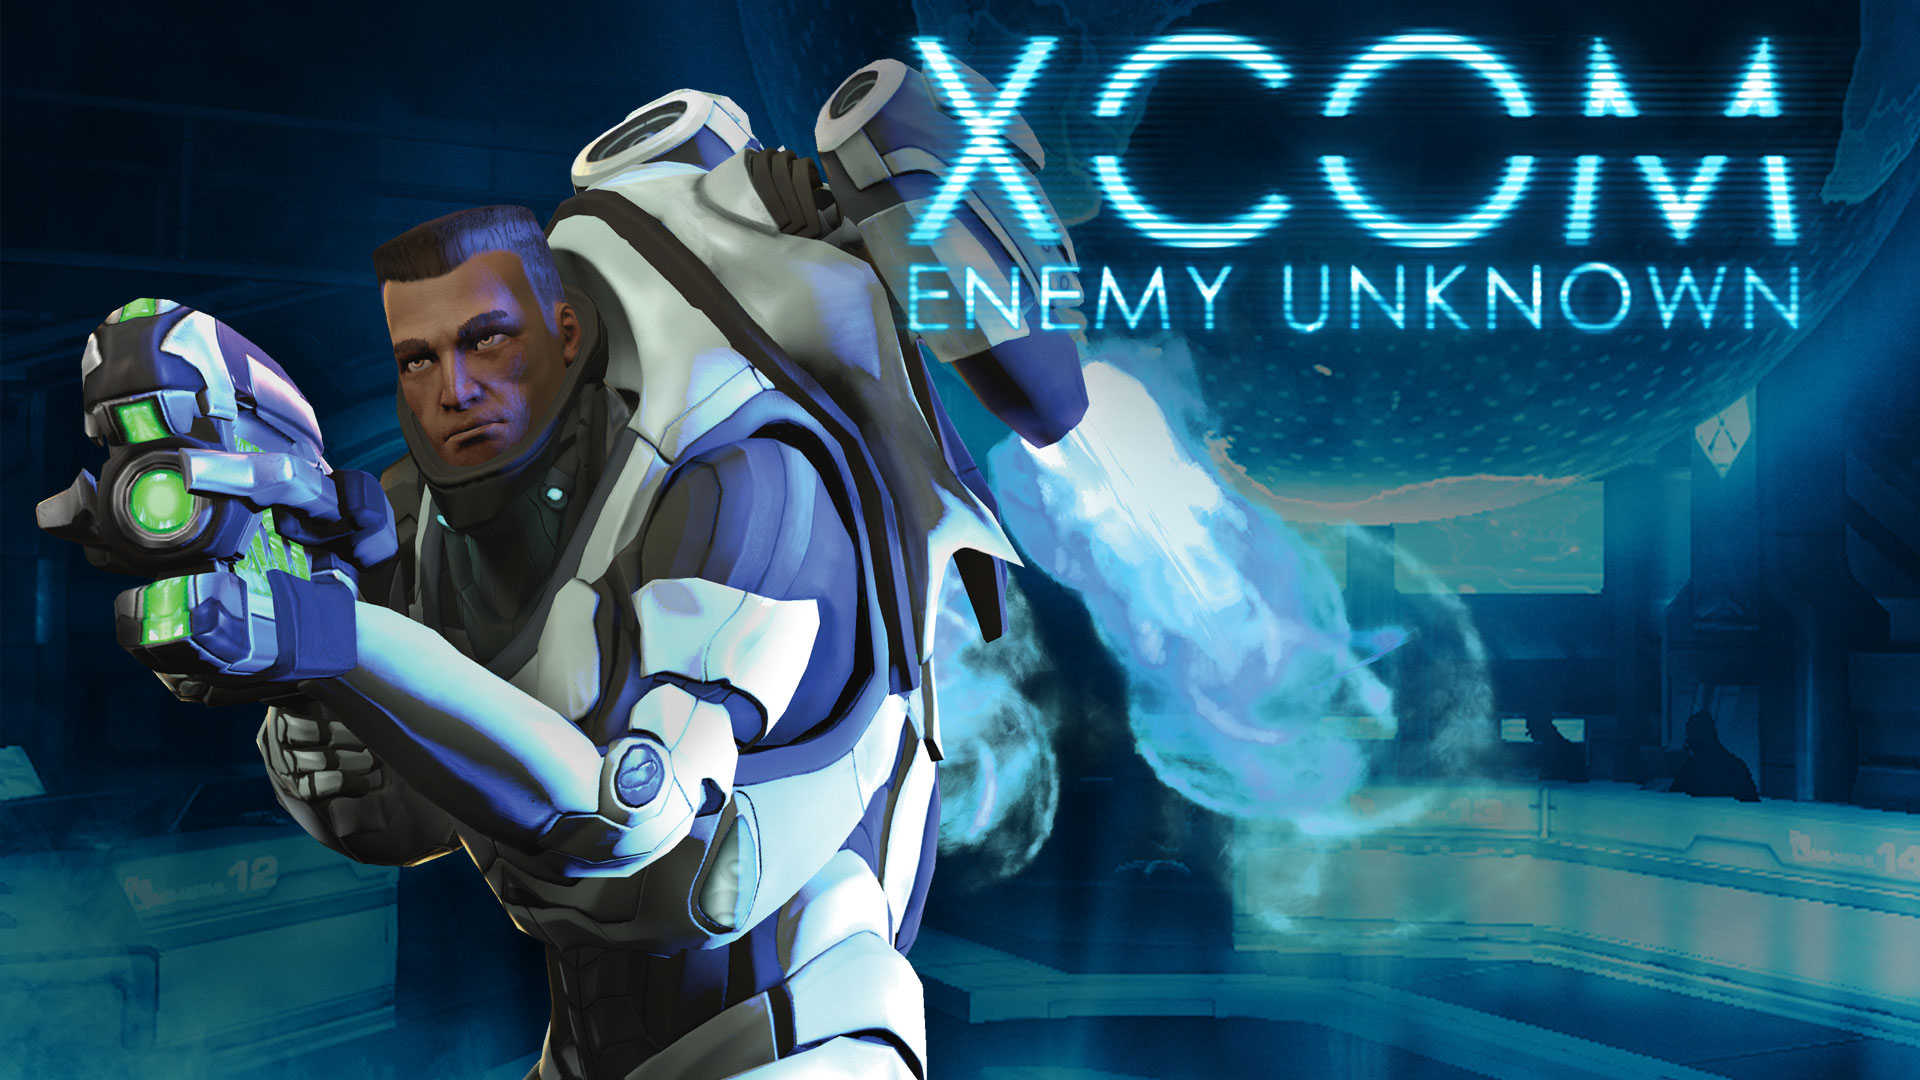 enemy within vs enemy unknown